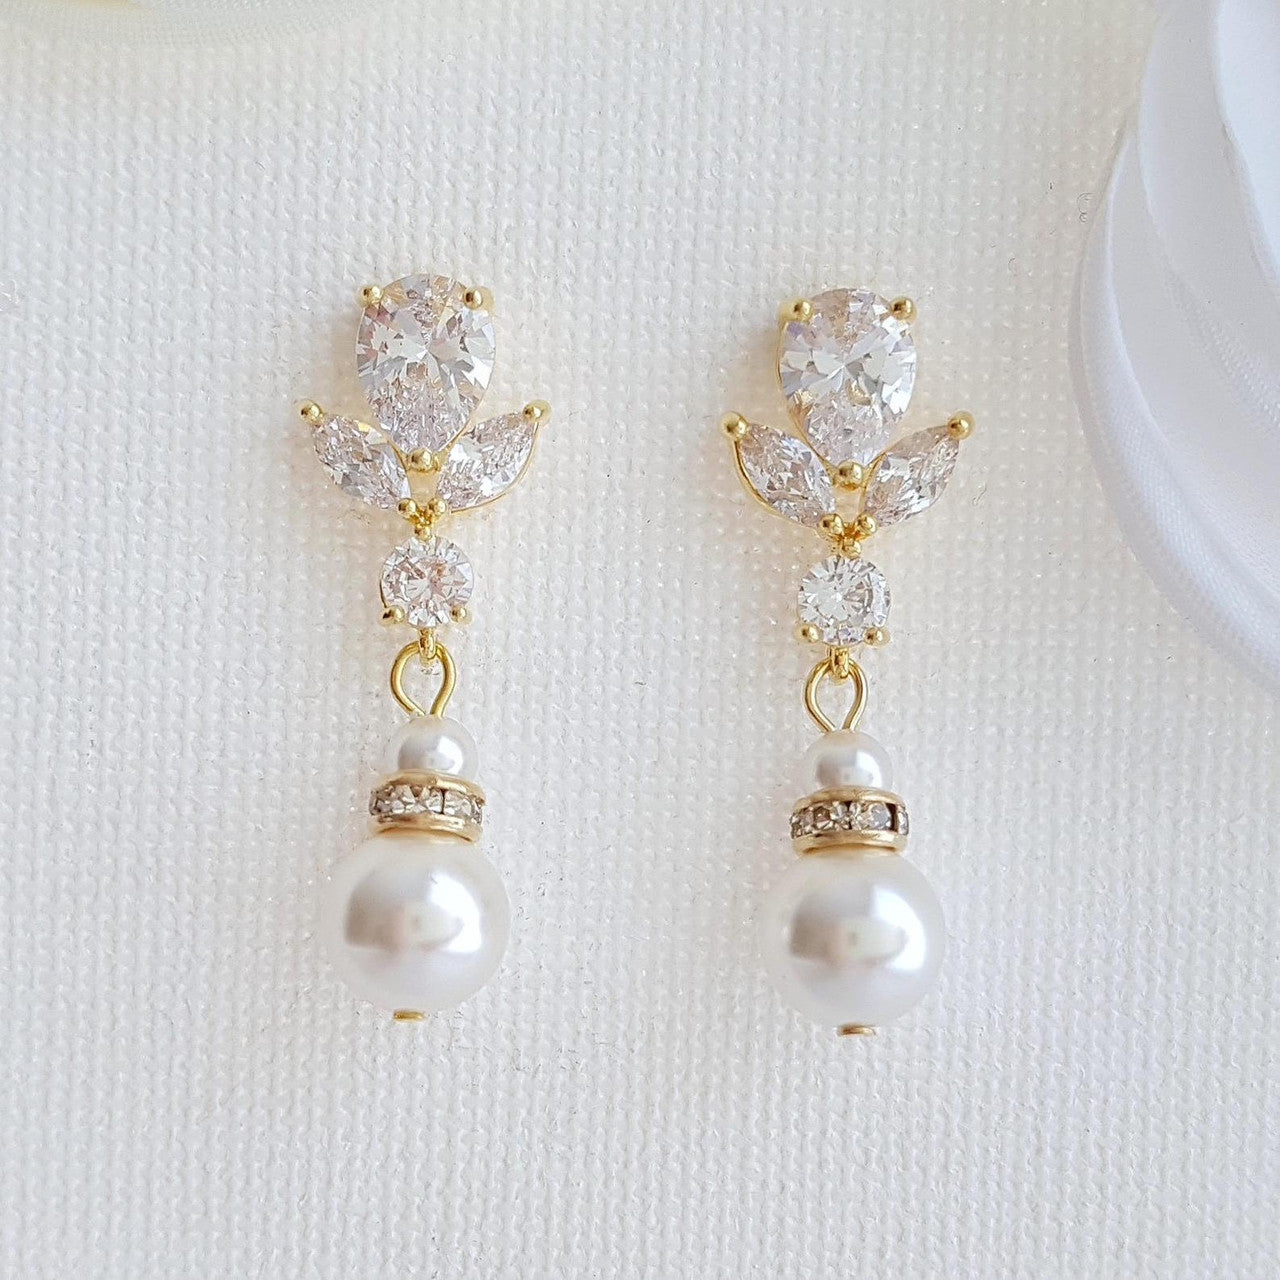 Bridal Earrings in Rose Gold and Pearl Drops-Nicole